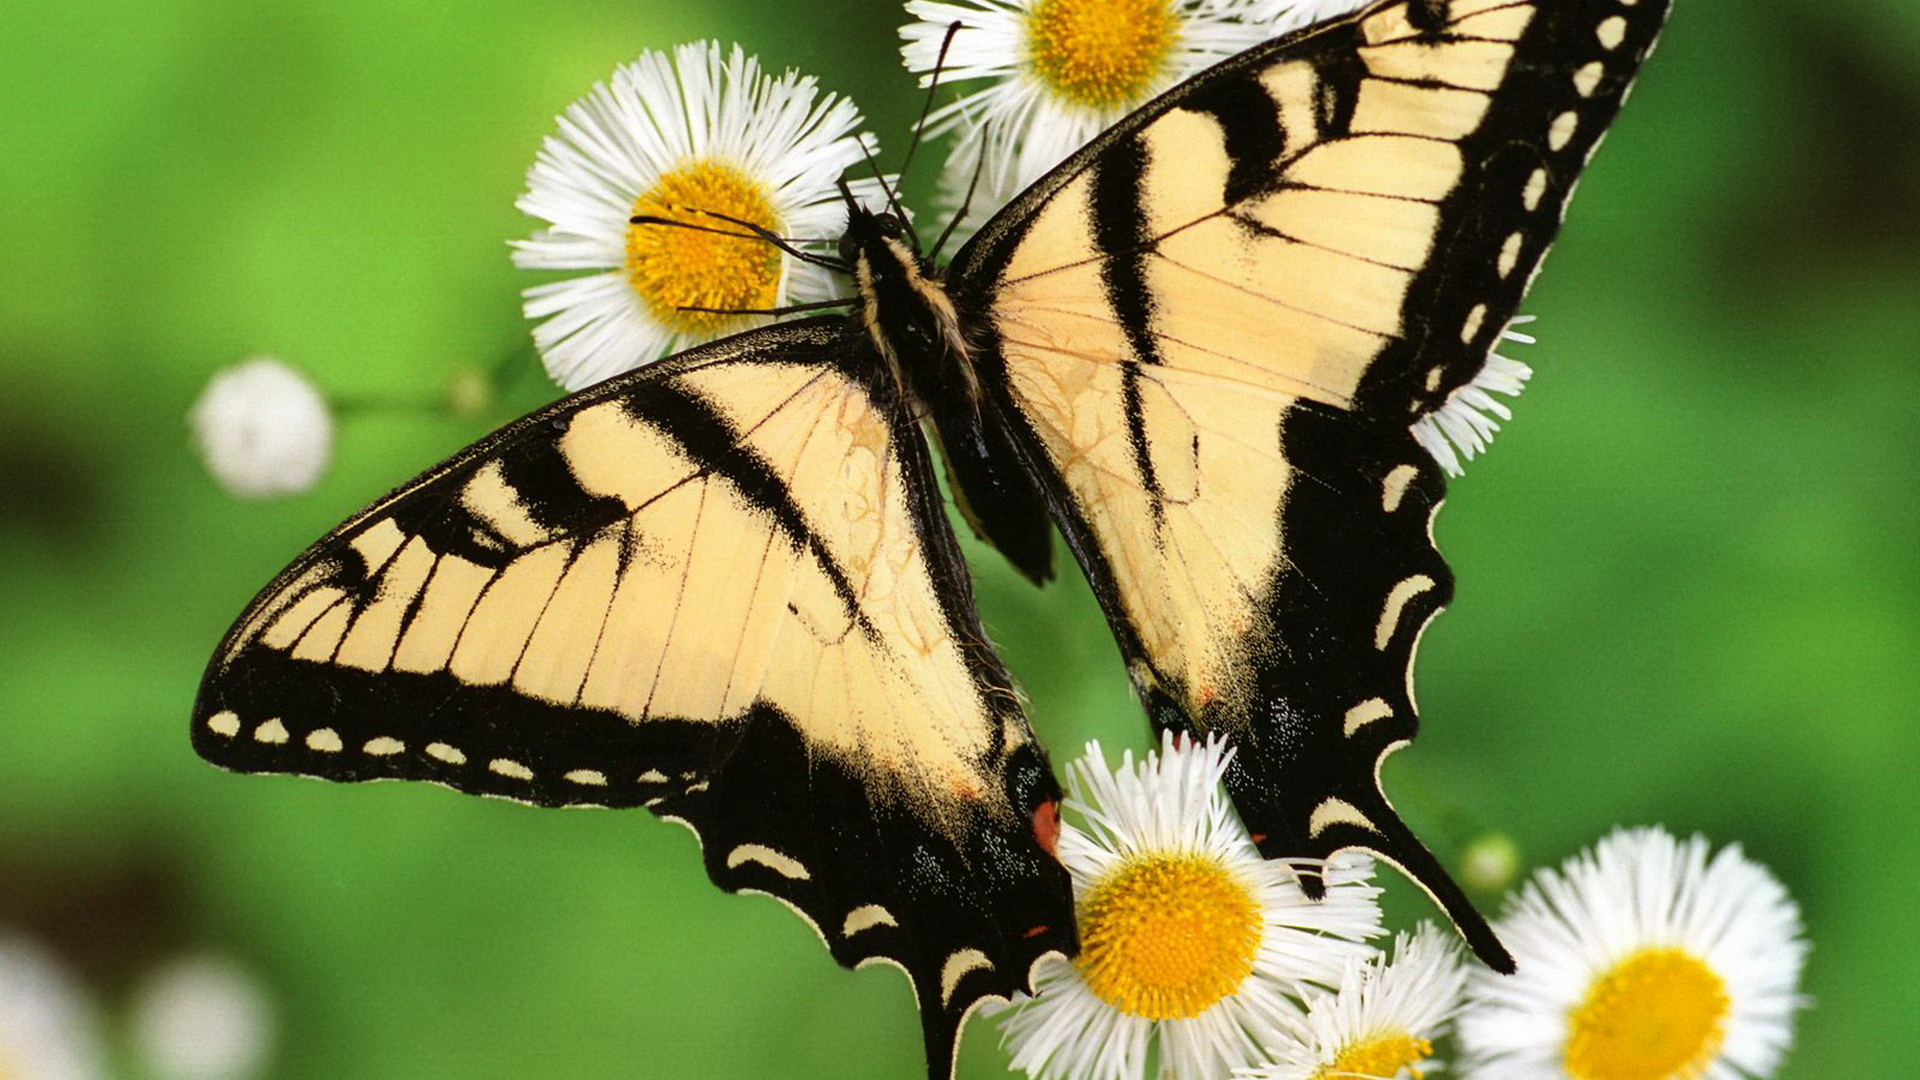 animal, swallowtail butterfly, butterfly, daisy, insects images